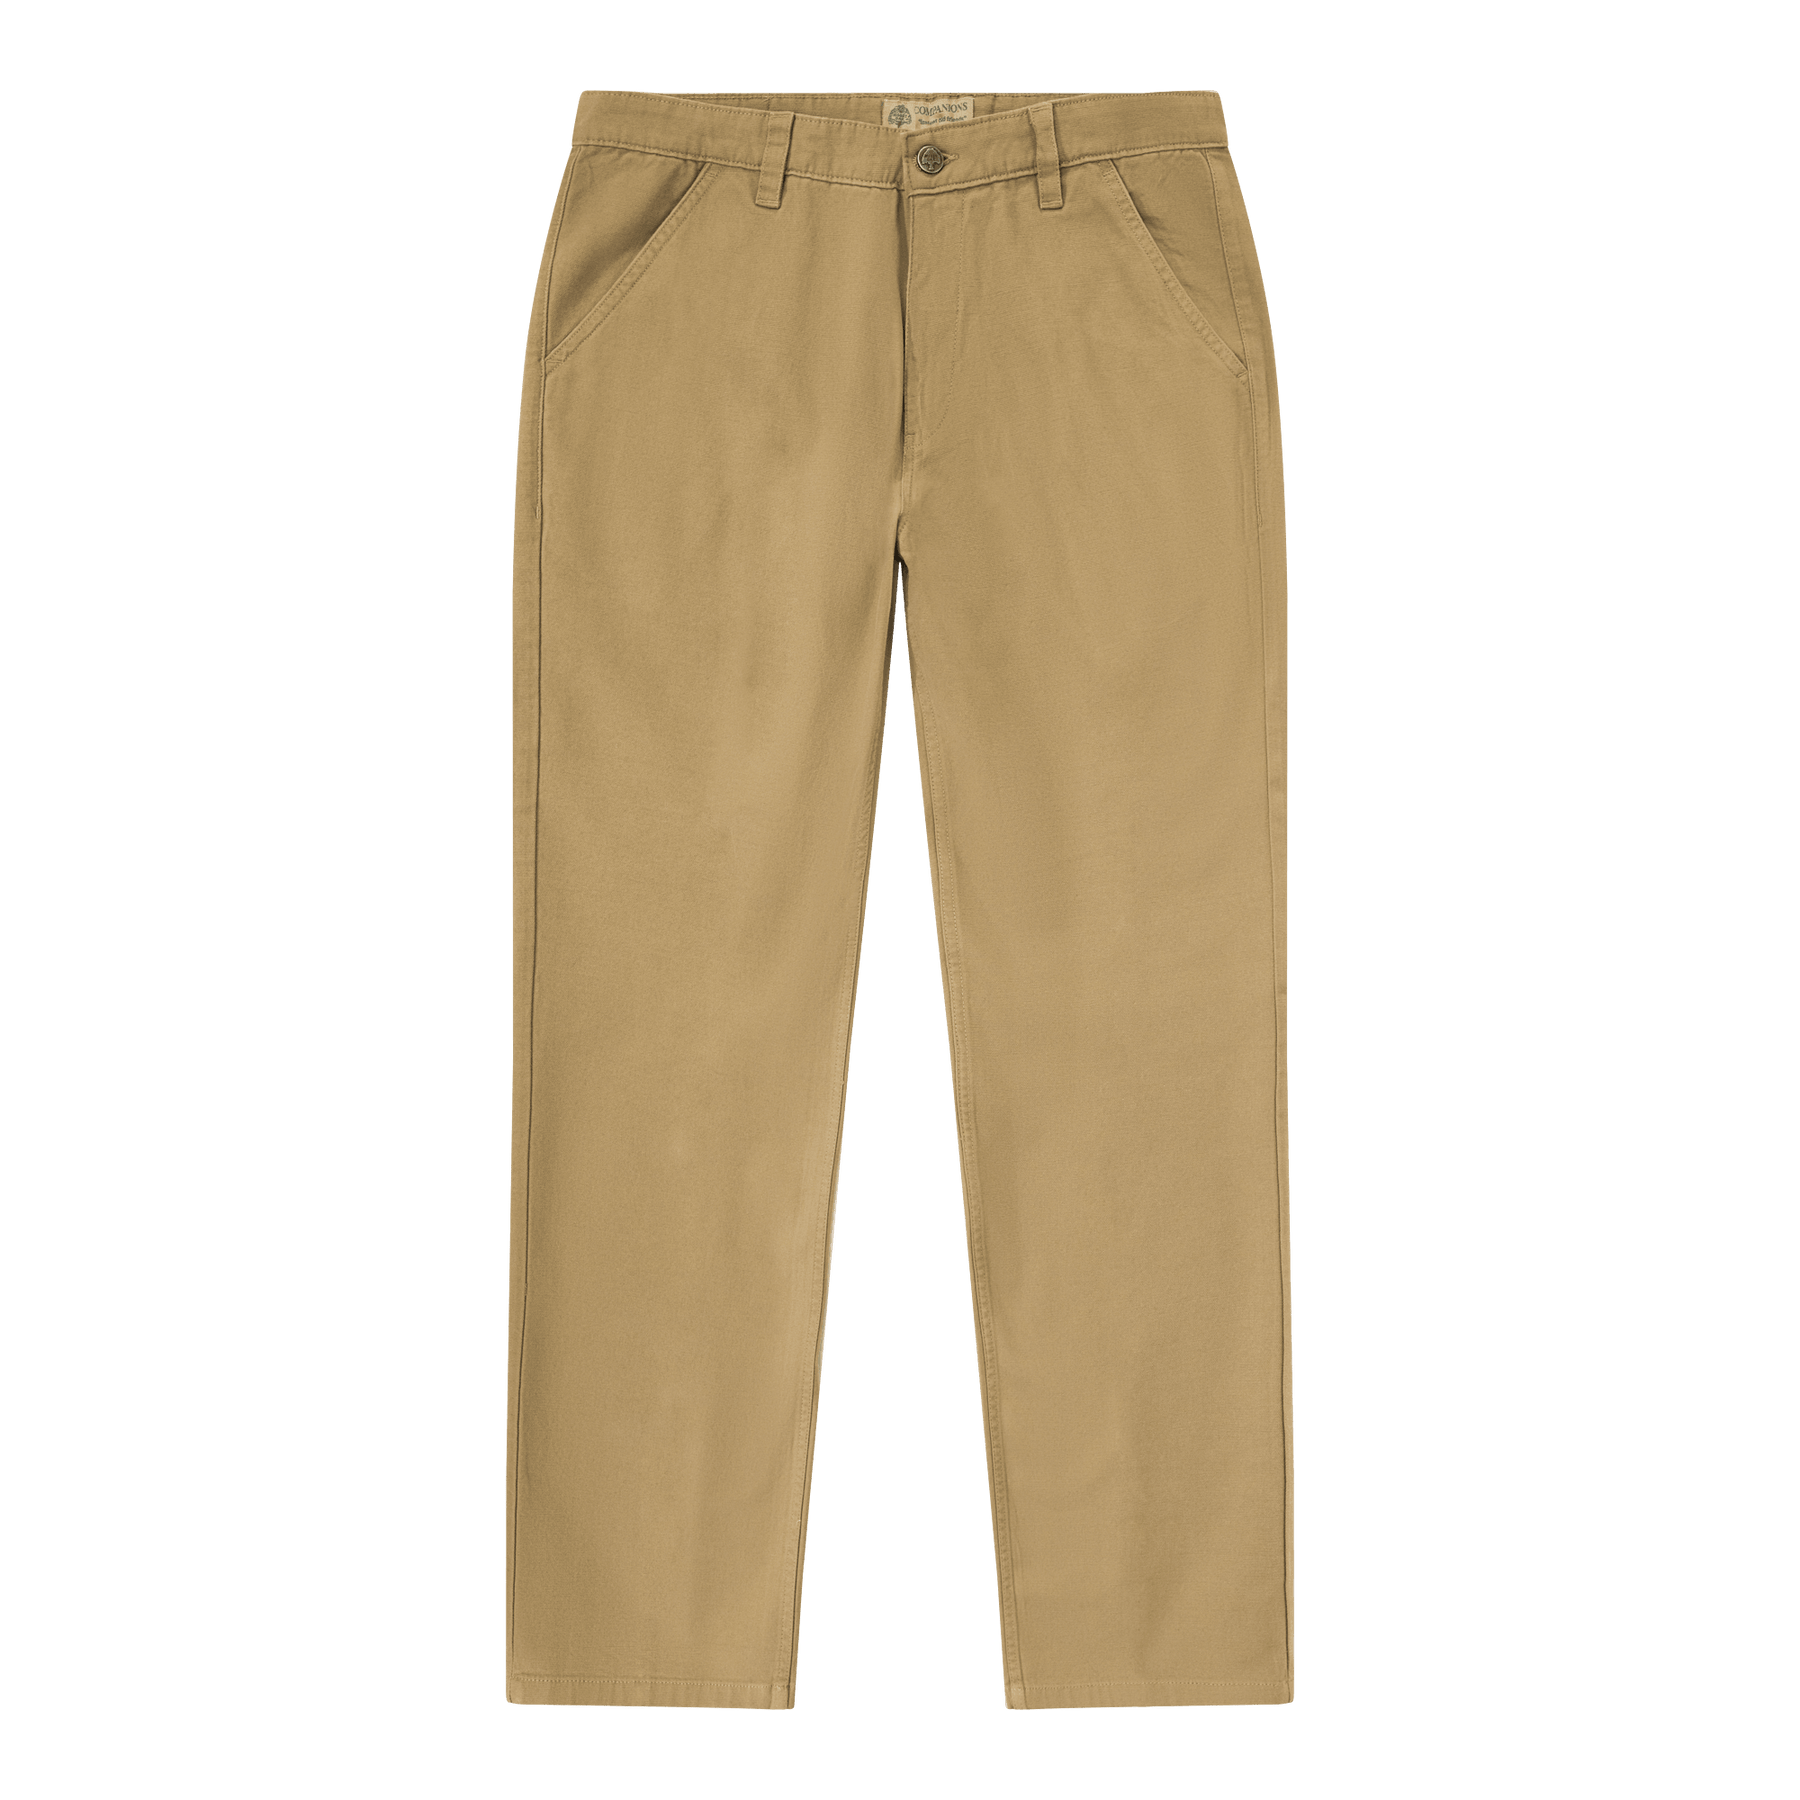 Do-All Pant – The Mossy Oak Store